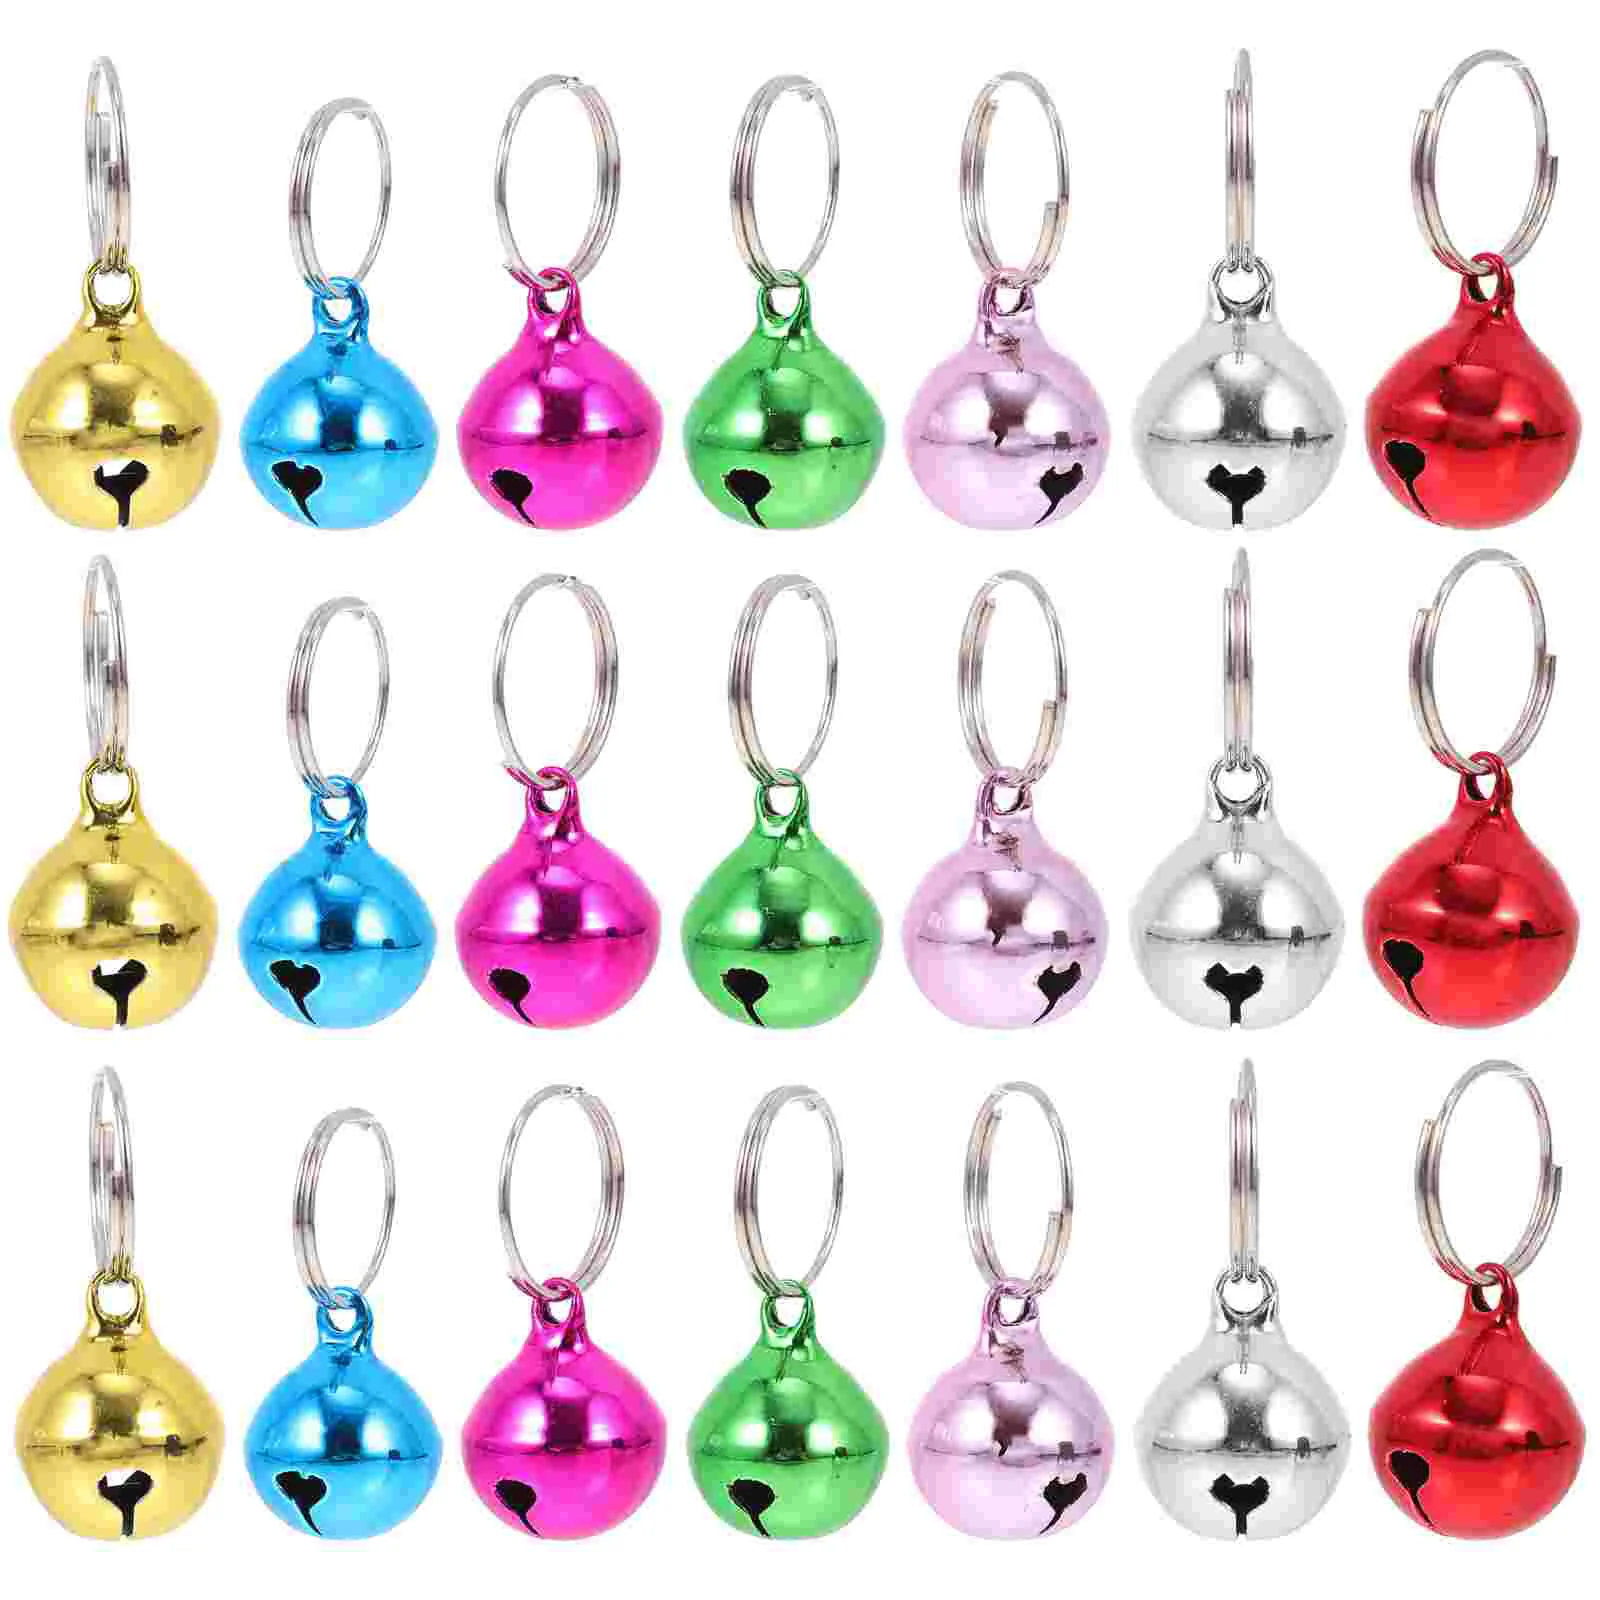 

24 Pcs Christmas Decor Pet Bell Accessories Multi-function Cat Bells Dog Accessory Adorable Collar Replaceable